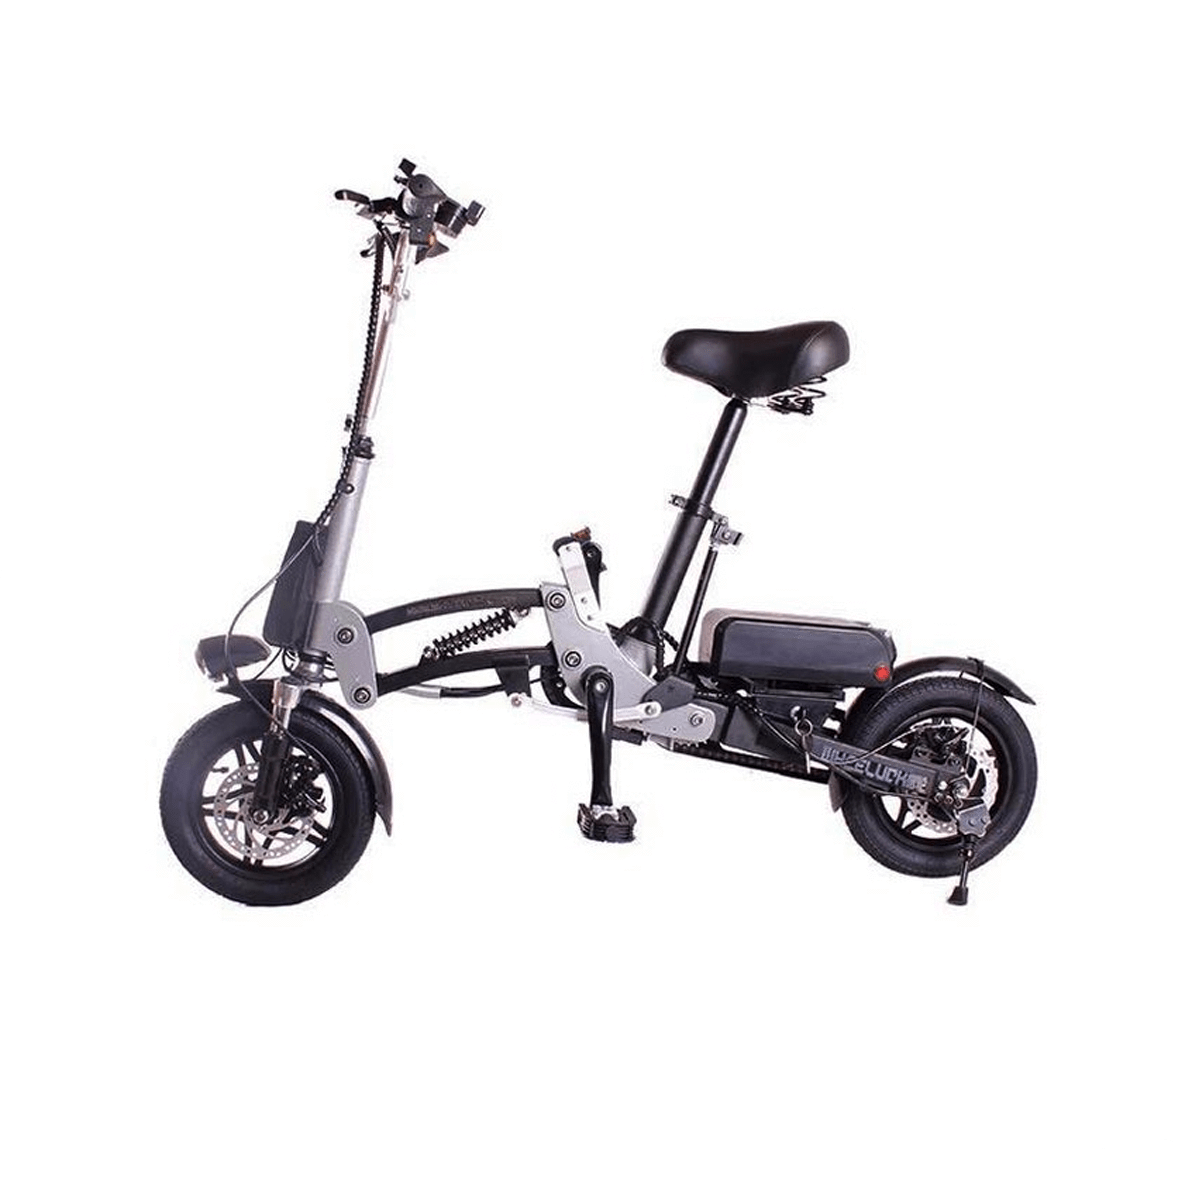 R12 36V 6A  Lightweight Lithium Battery Aluminum Alloy Folding Bicycle for Adults